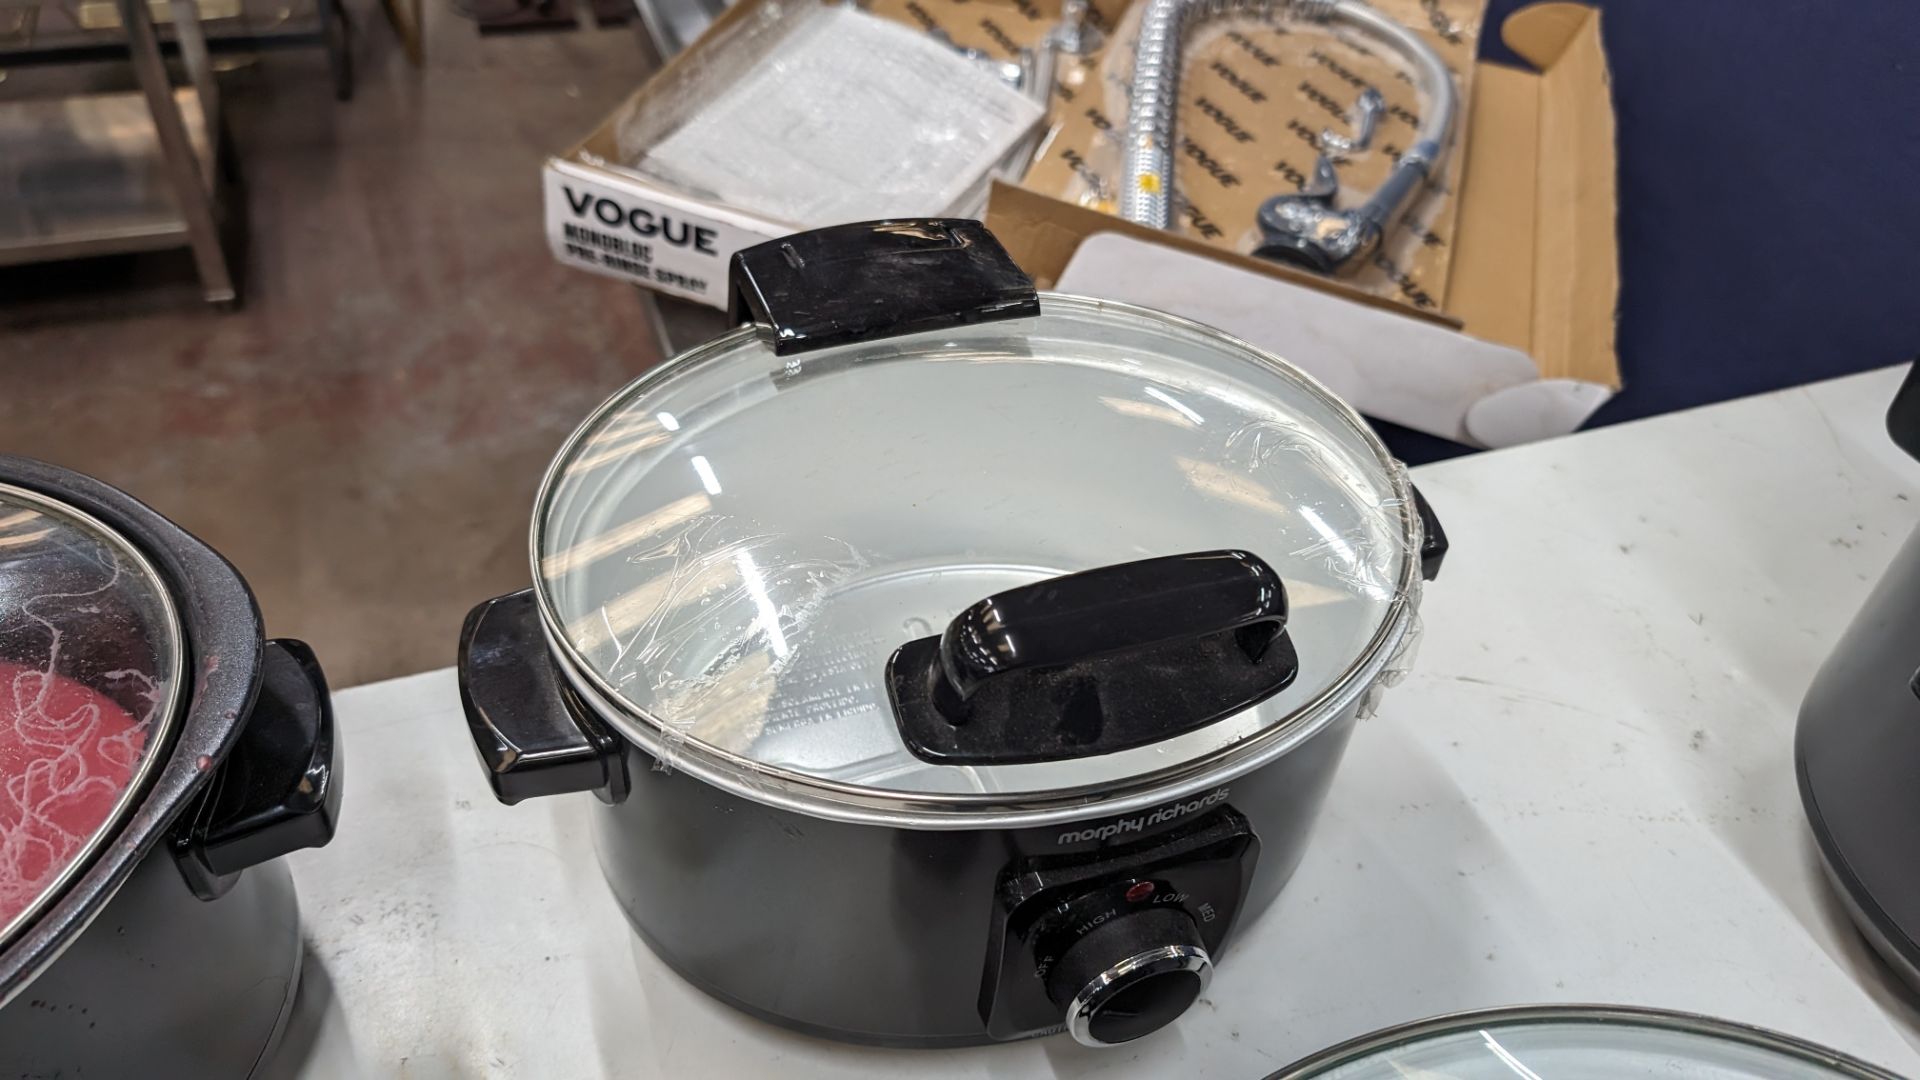 6 off Morphy Richards hinged lid slow cookers, model 460020. NB: At least some of these have been u - Image 8 of 10